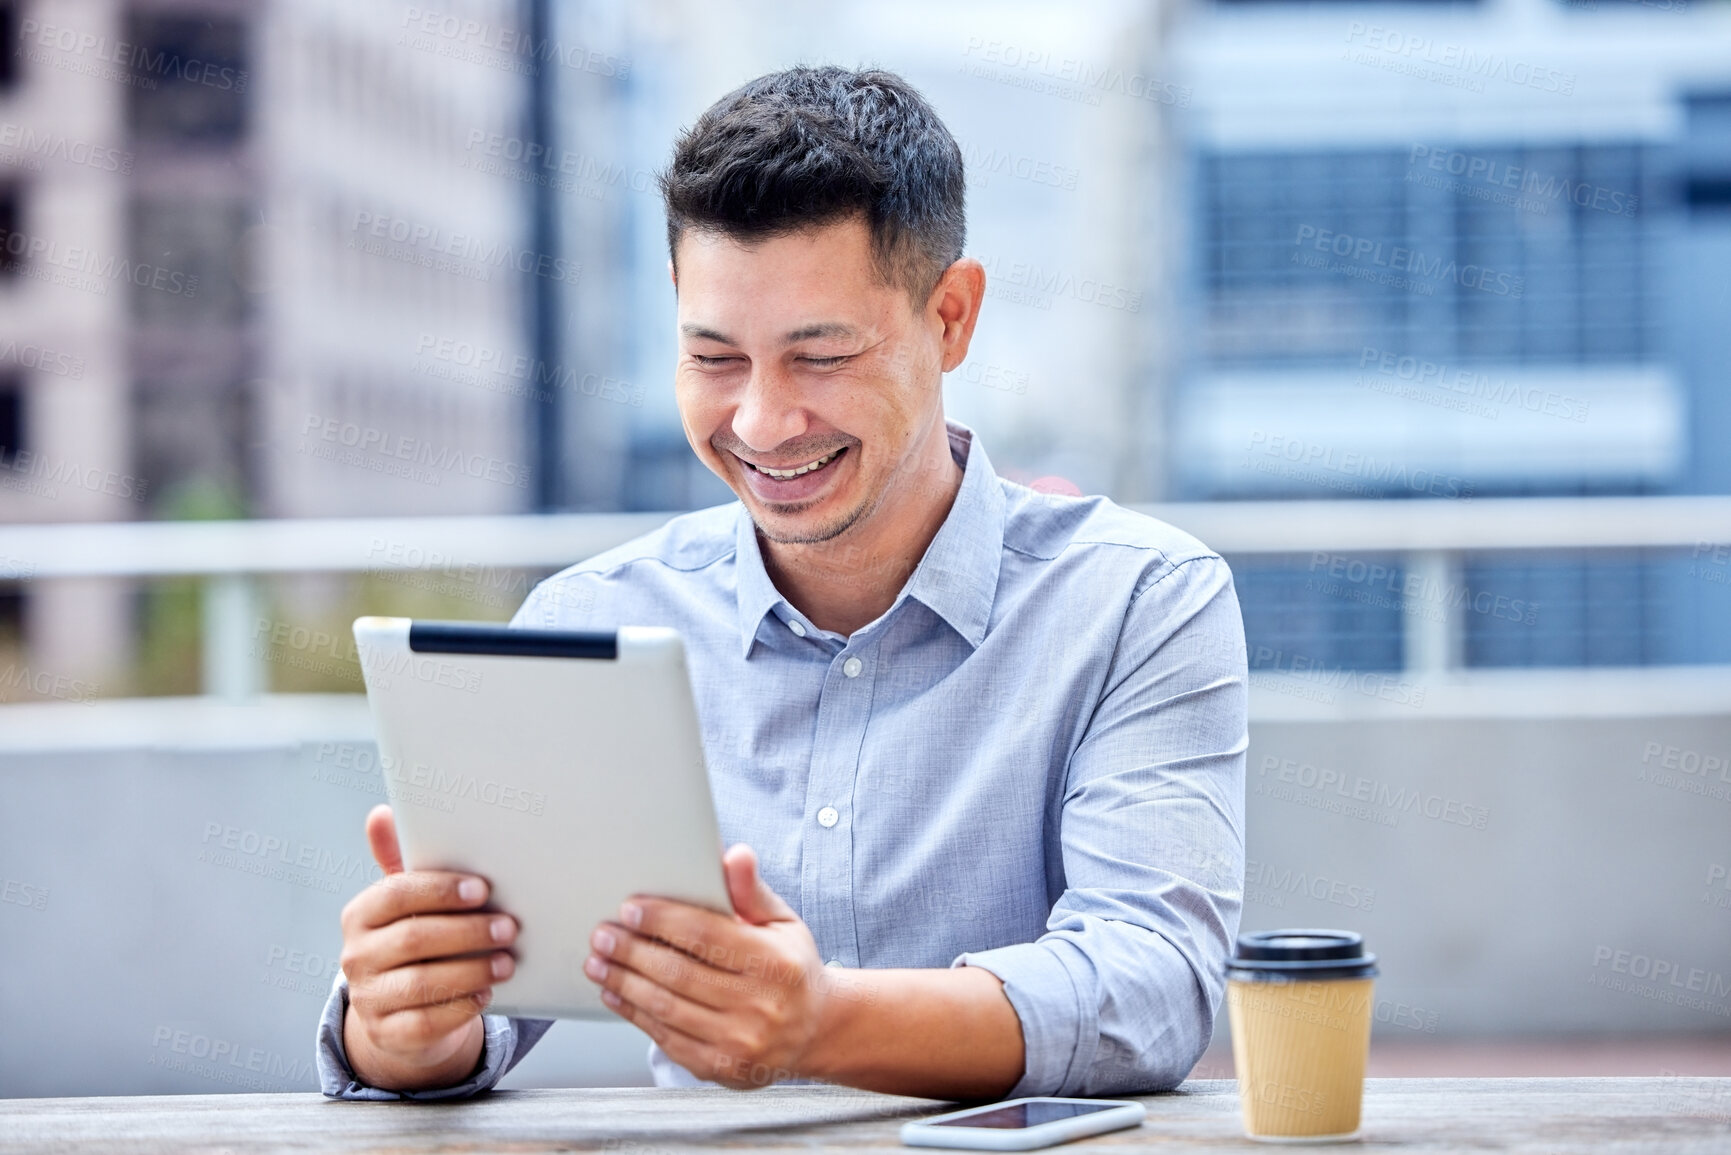 Buy stock photo Shot of a young businessman using a digital tablet at work